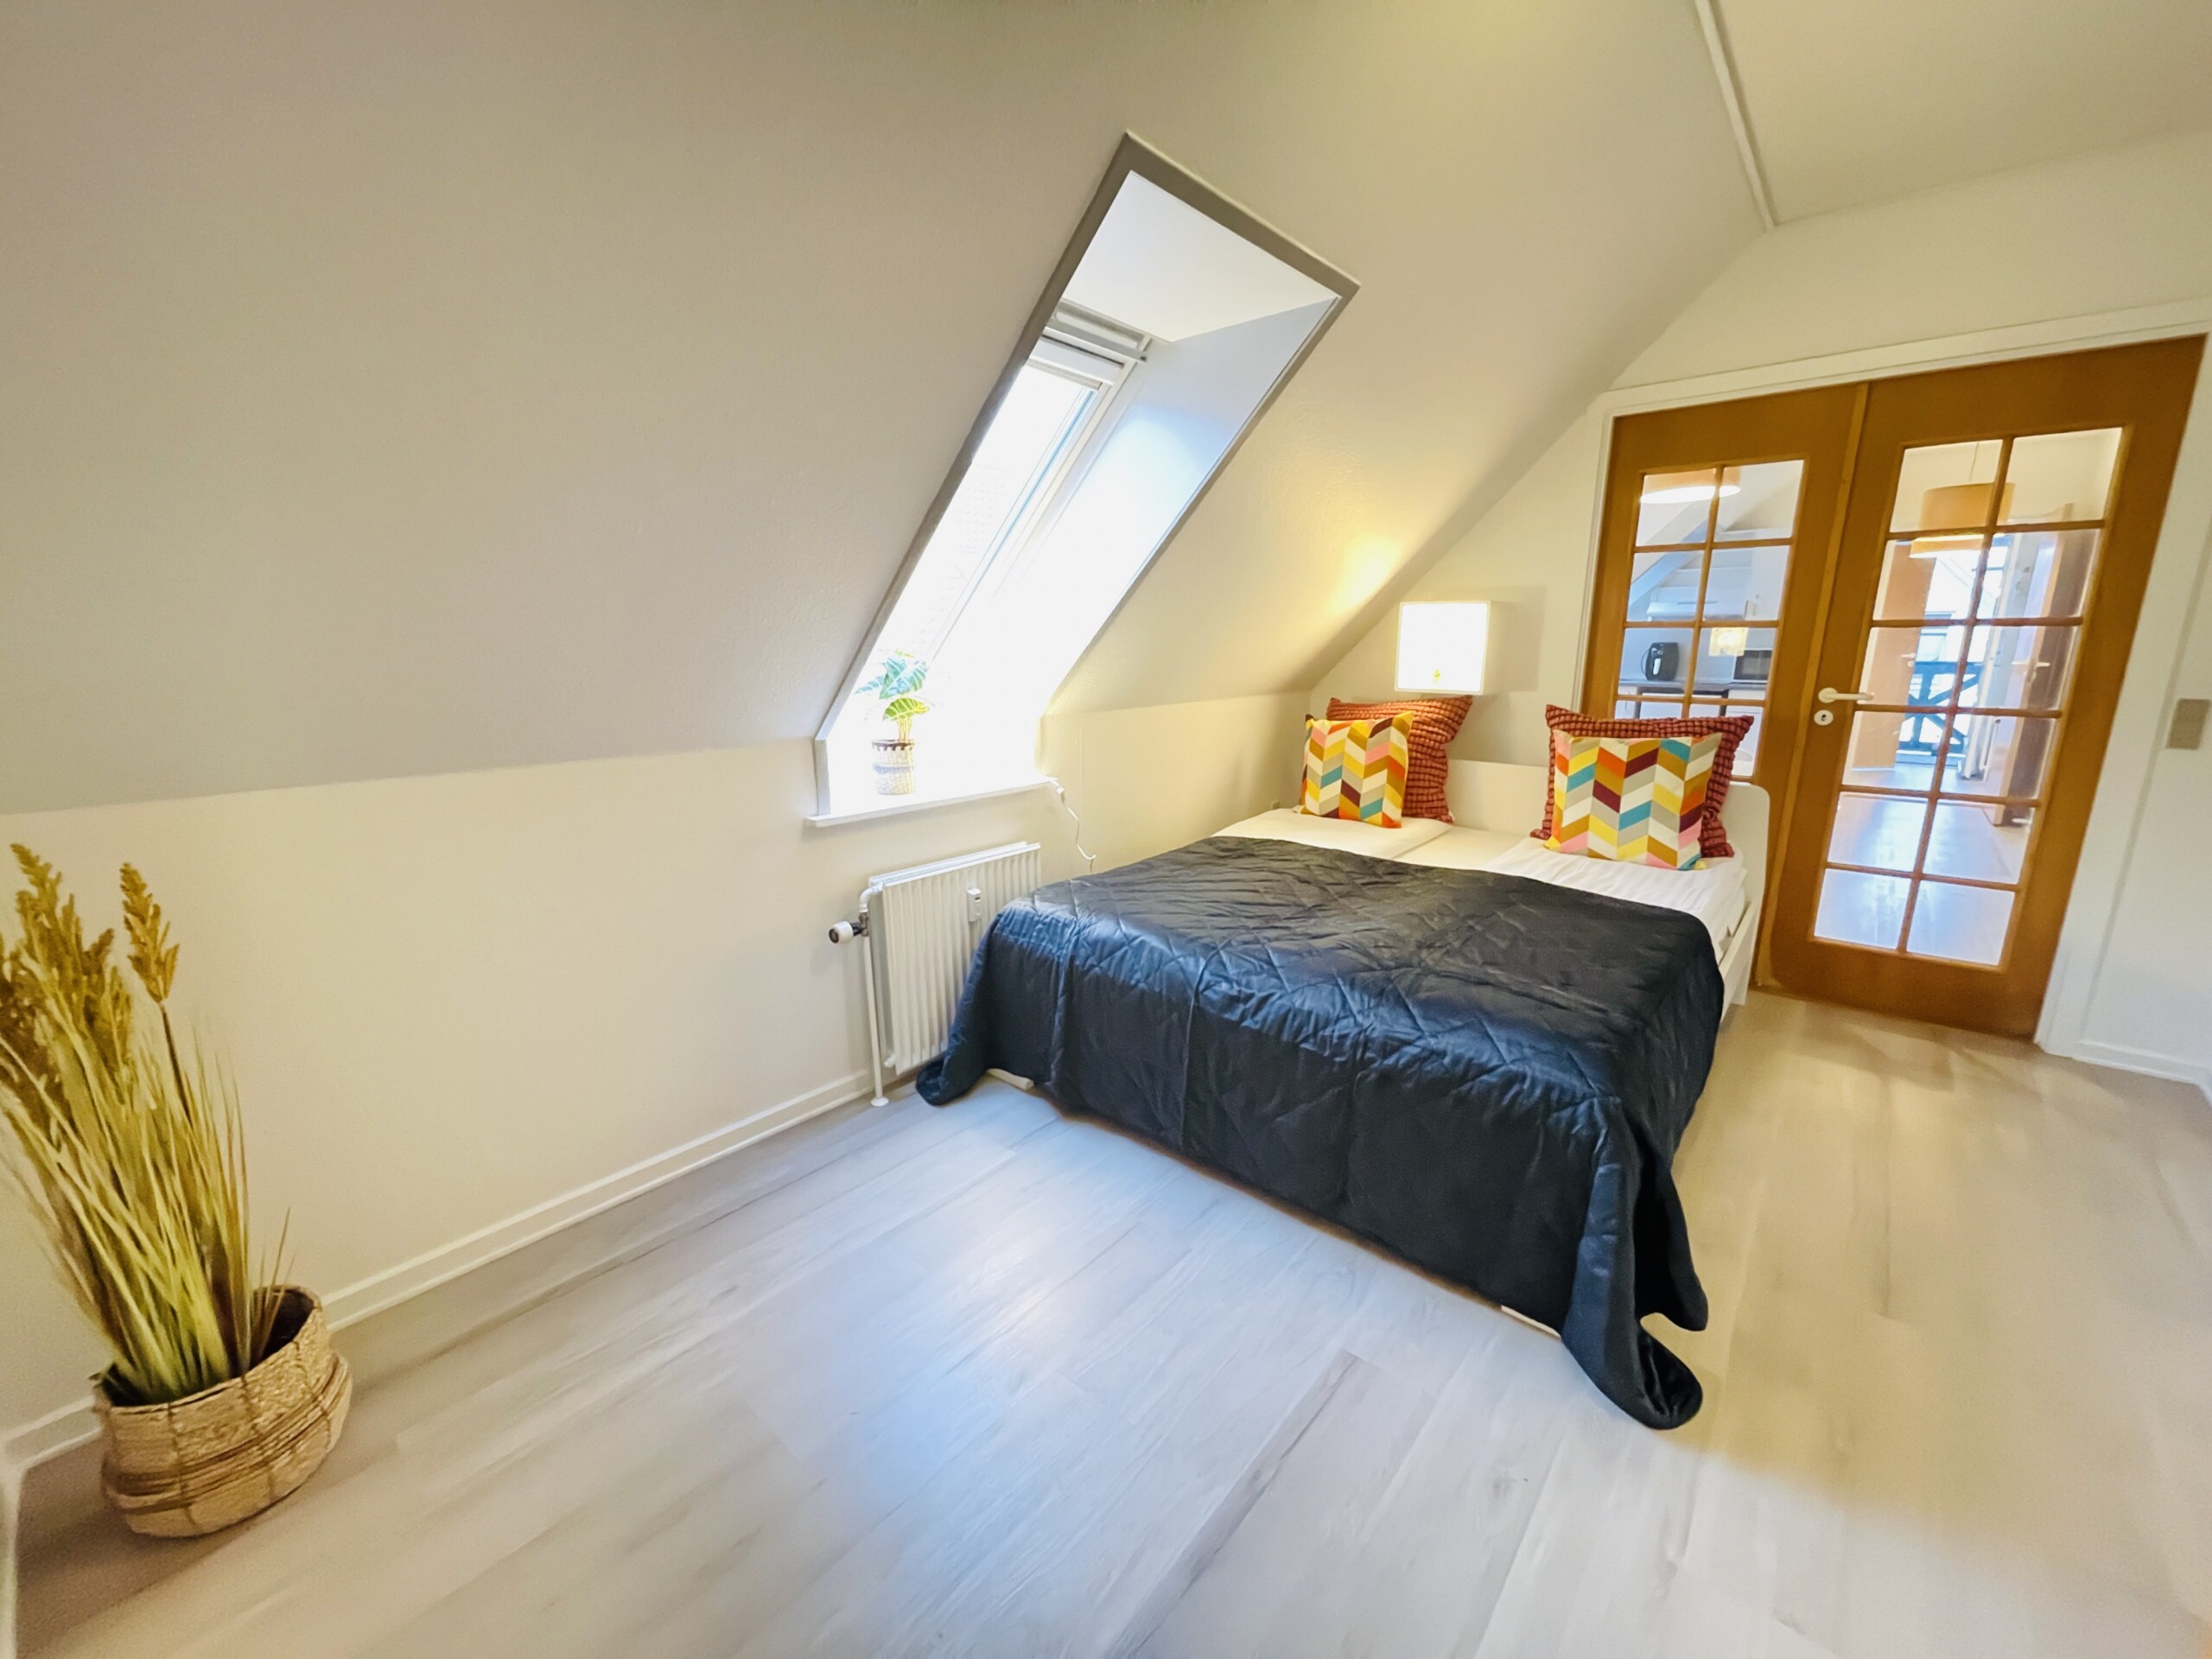 Property Image 1 - aday - Marvelous 1 Bedroom Apartment in Hjorring